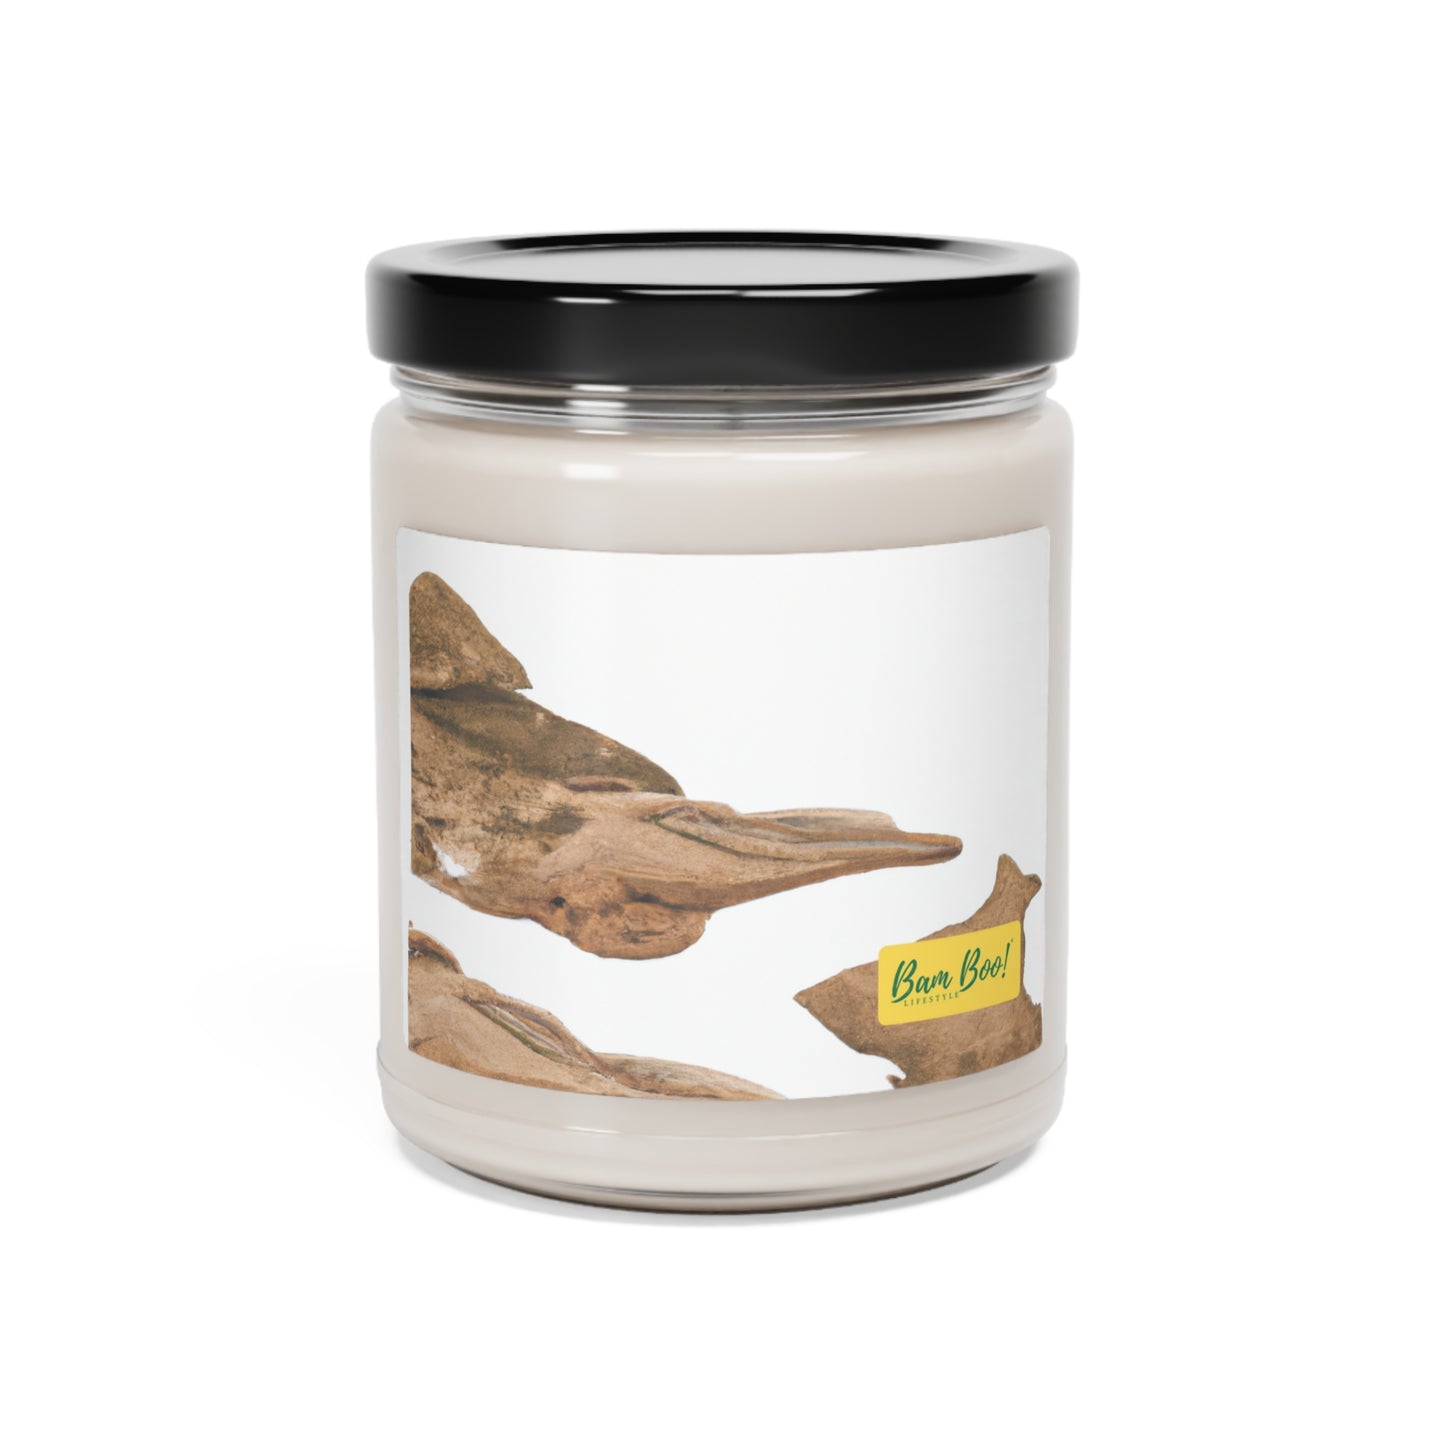 "Earth in Abstraction" - Bam Boo! Lifestyle Eco-friendly Soy Candle